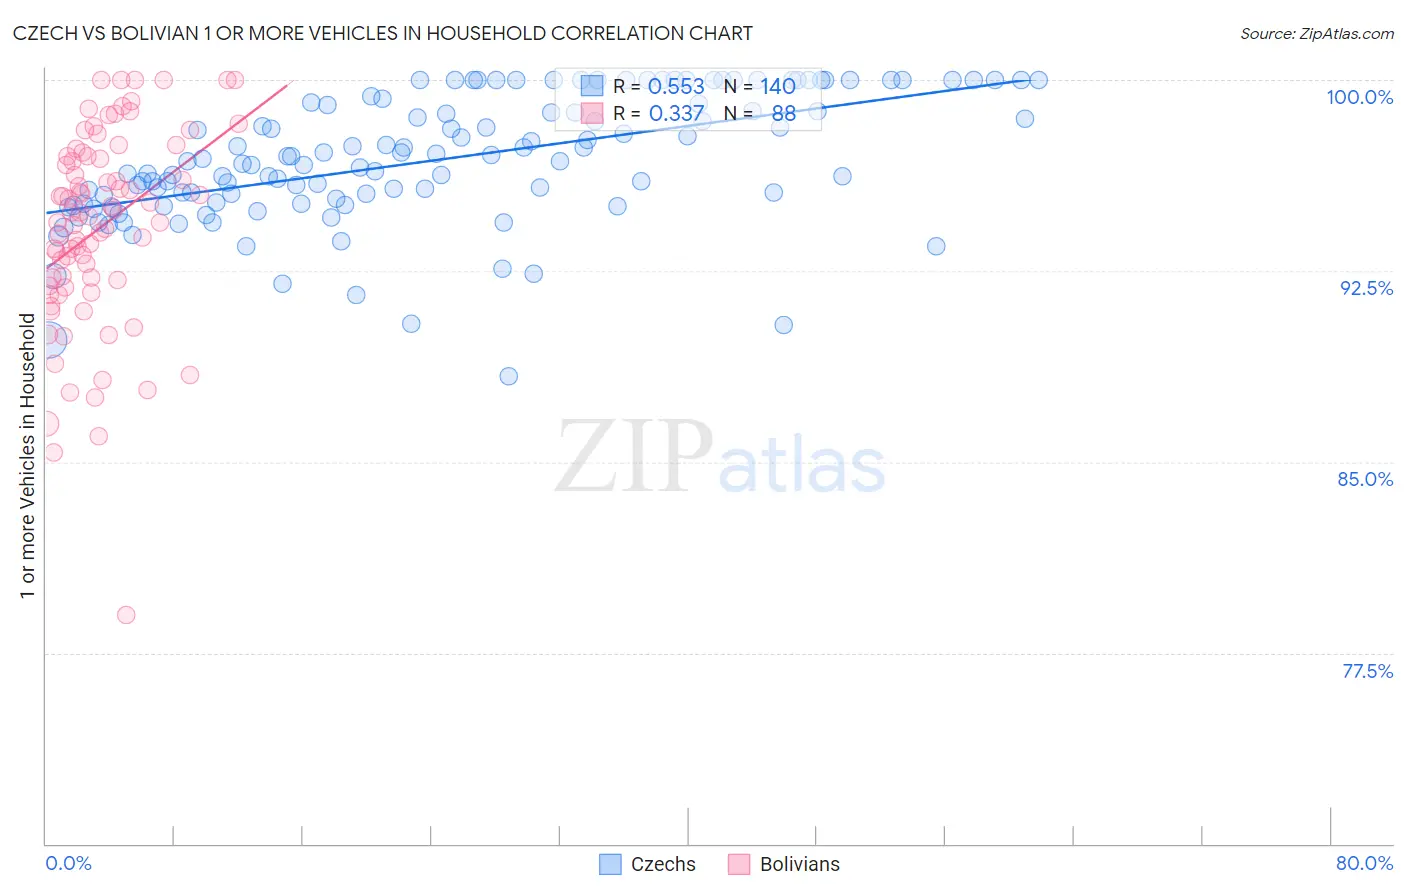 Czech vs Bolivian 1 or more Vehicles in Household